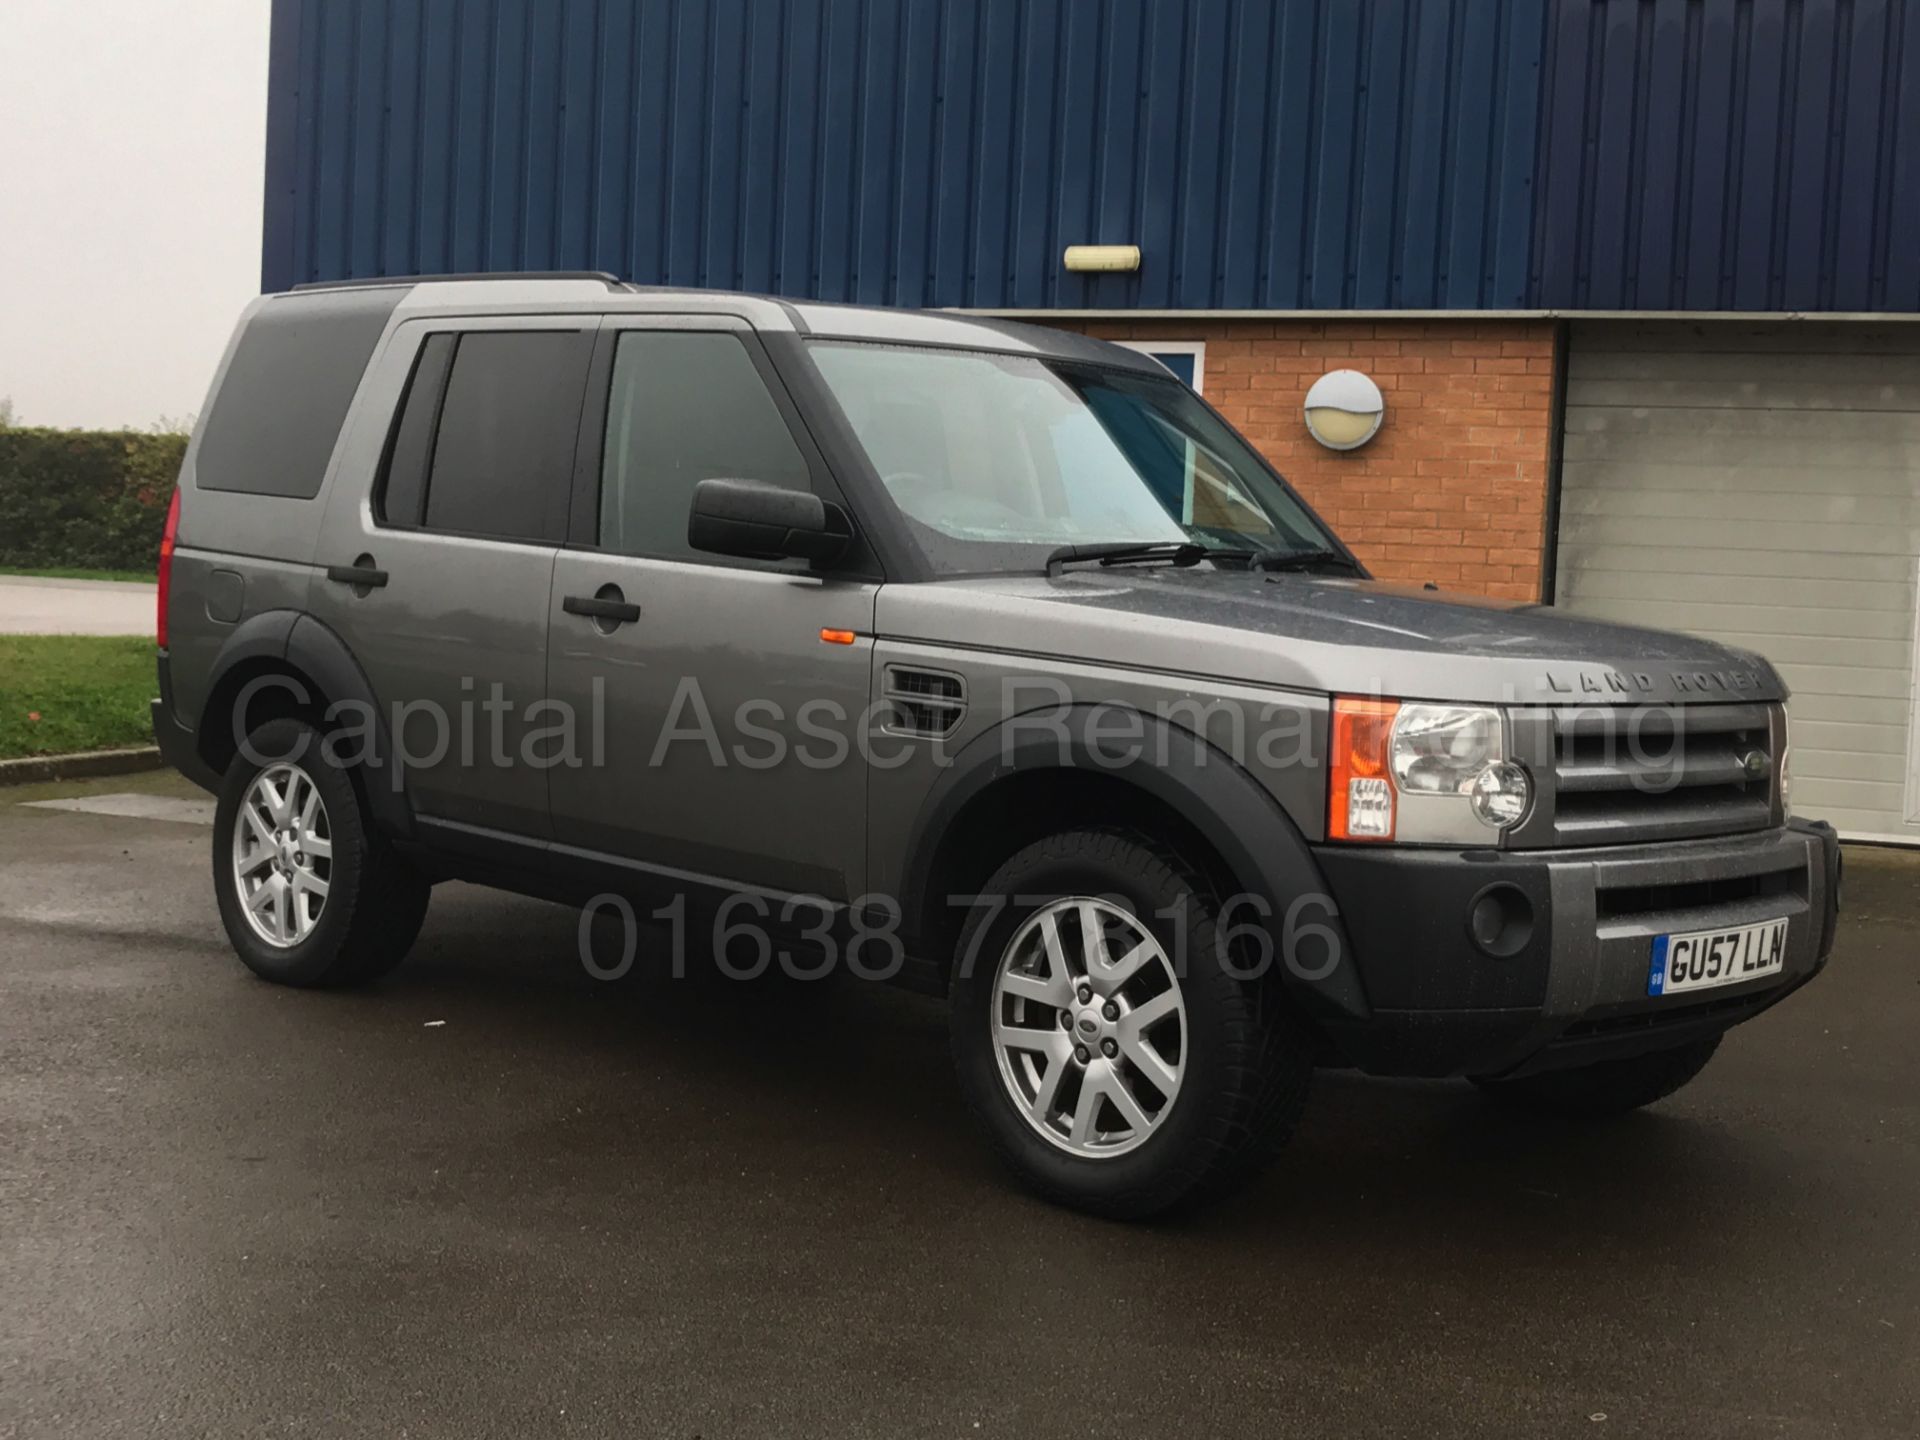 (On Sale) LAND ROVER DISCOVERY 3 XS 'COMMERCIAL' (2008 MODEL) 'TDV6 - 190 BHP - AUTO'